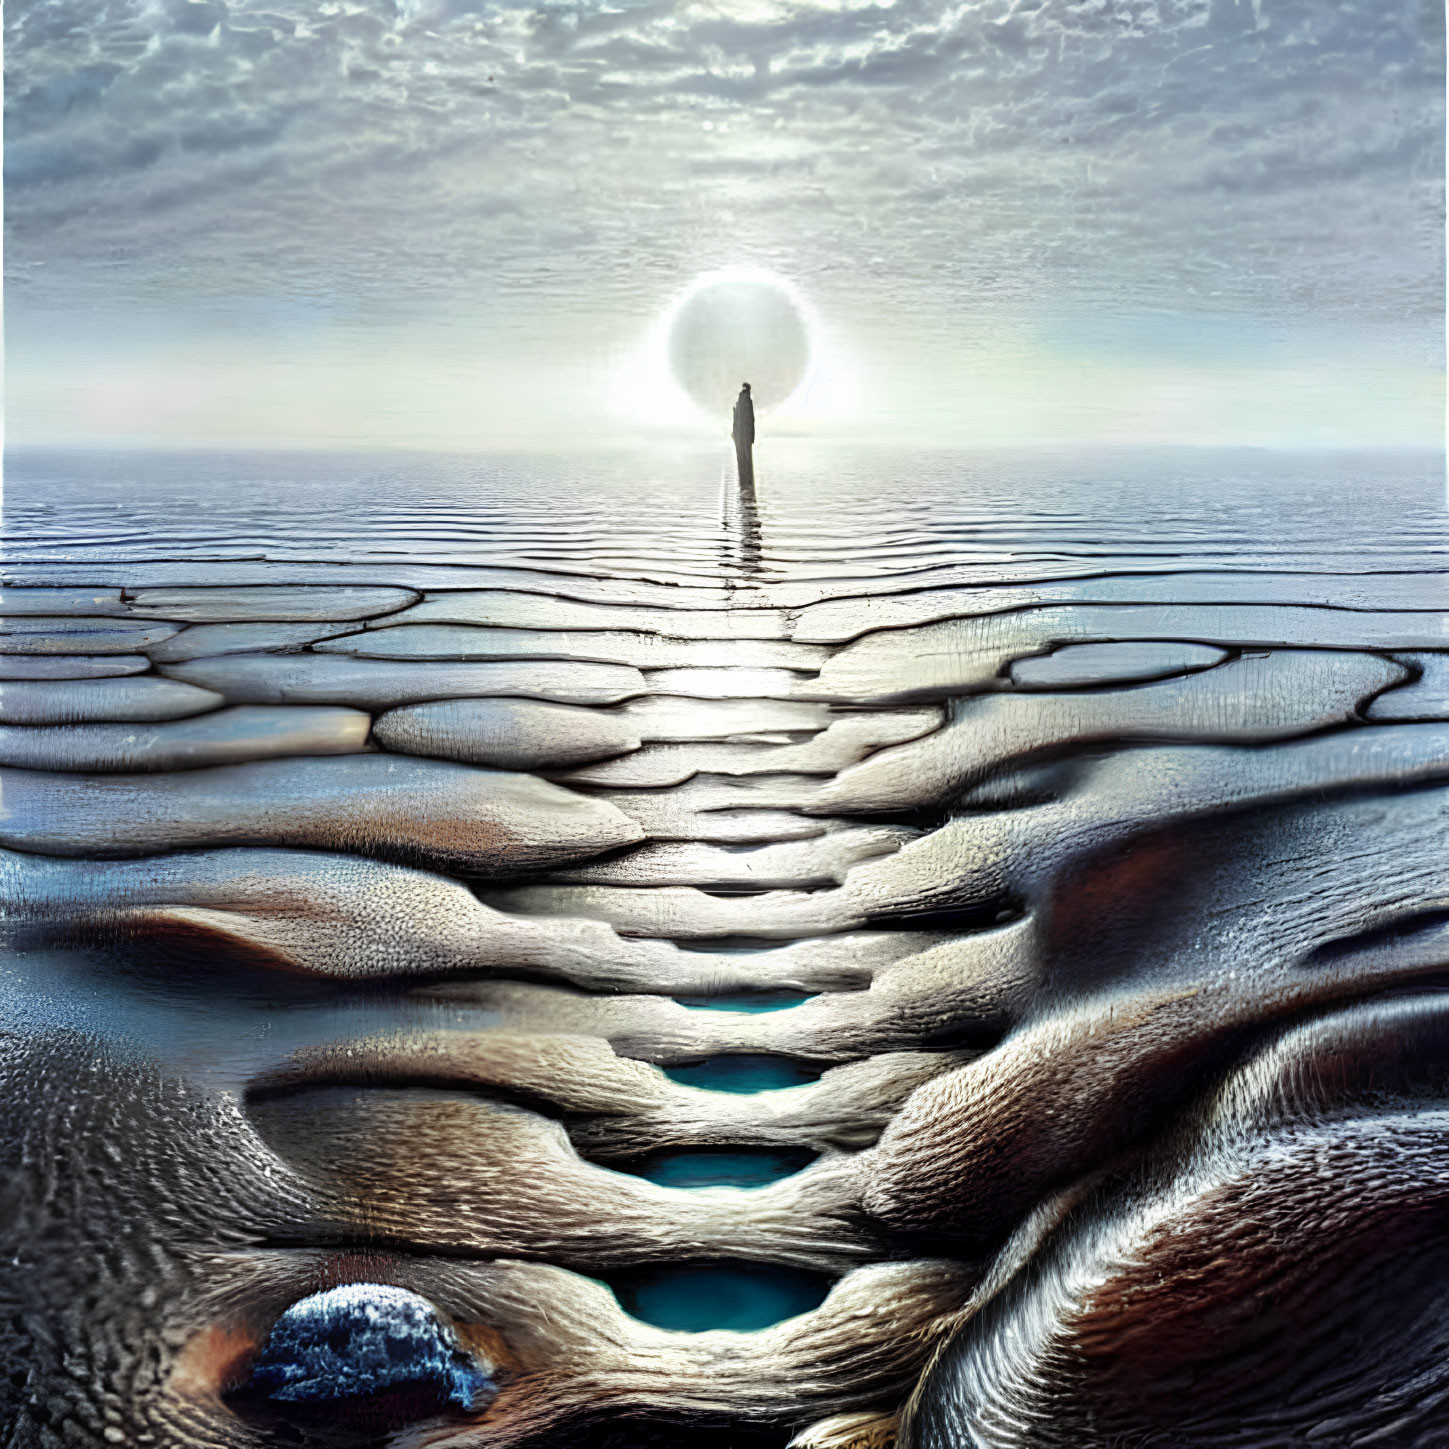 Solitary Figure in Surreal Landscape with Cracked Earth and Glaring Sun